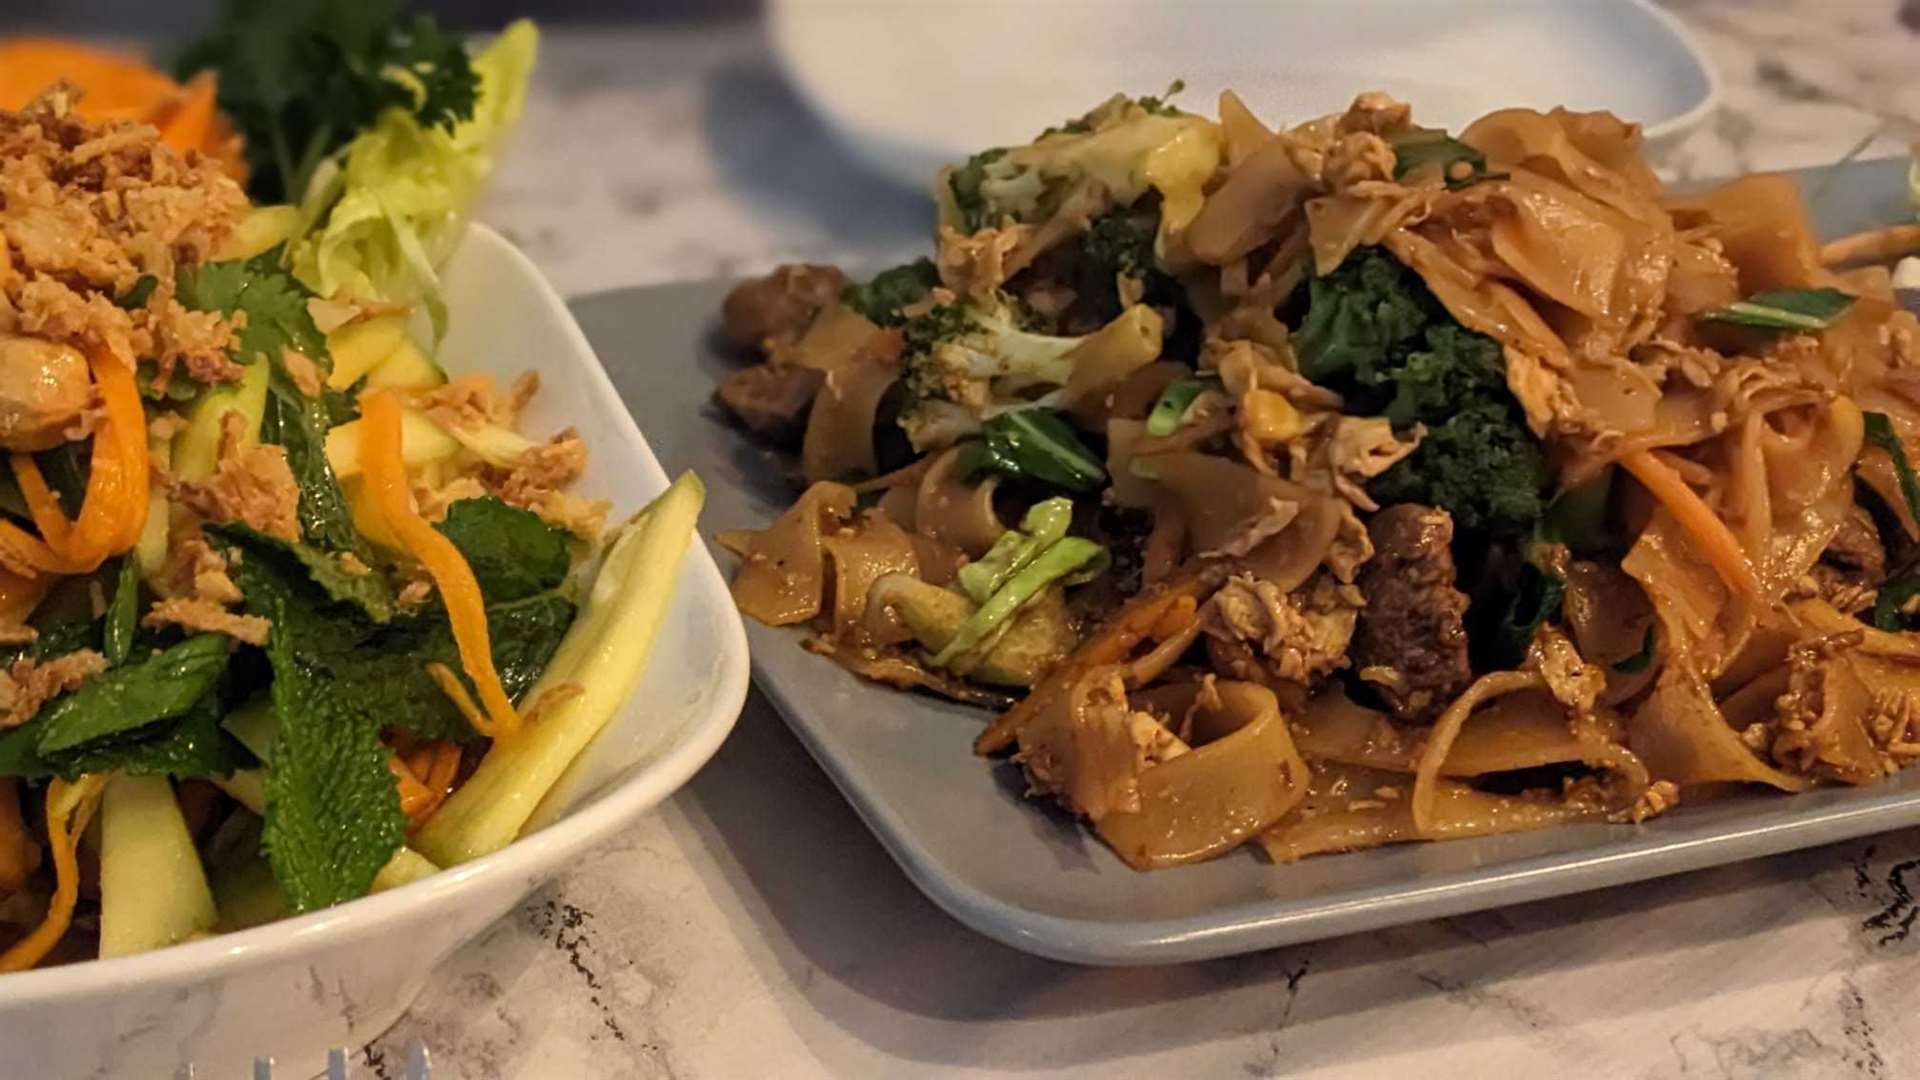 Beef pad see ew and mango salad at Daow’s Kitchen in Folkestone